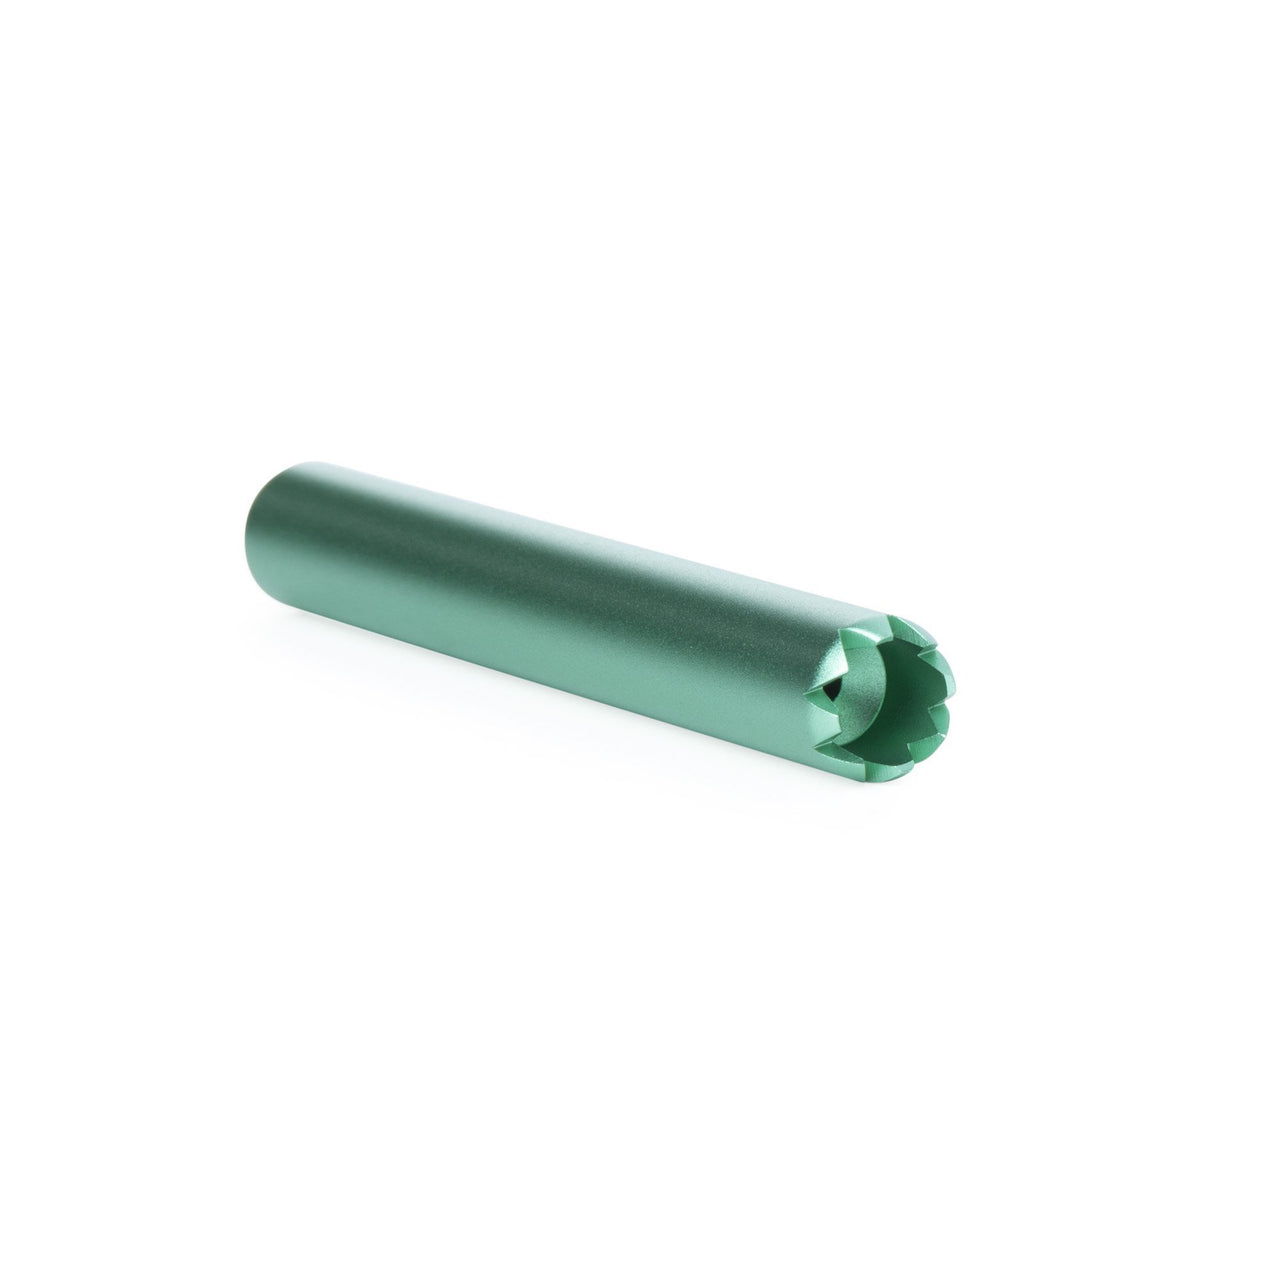 GRAV Dugout & One-Hitter / $ 59.99 at 420 Science